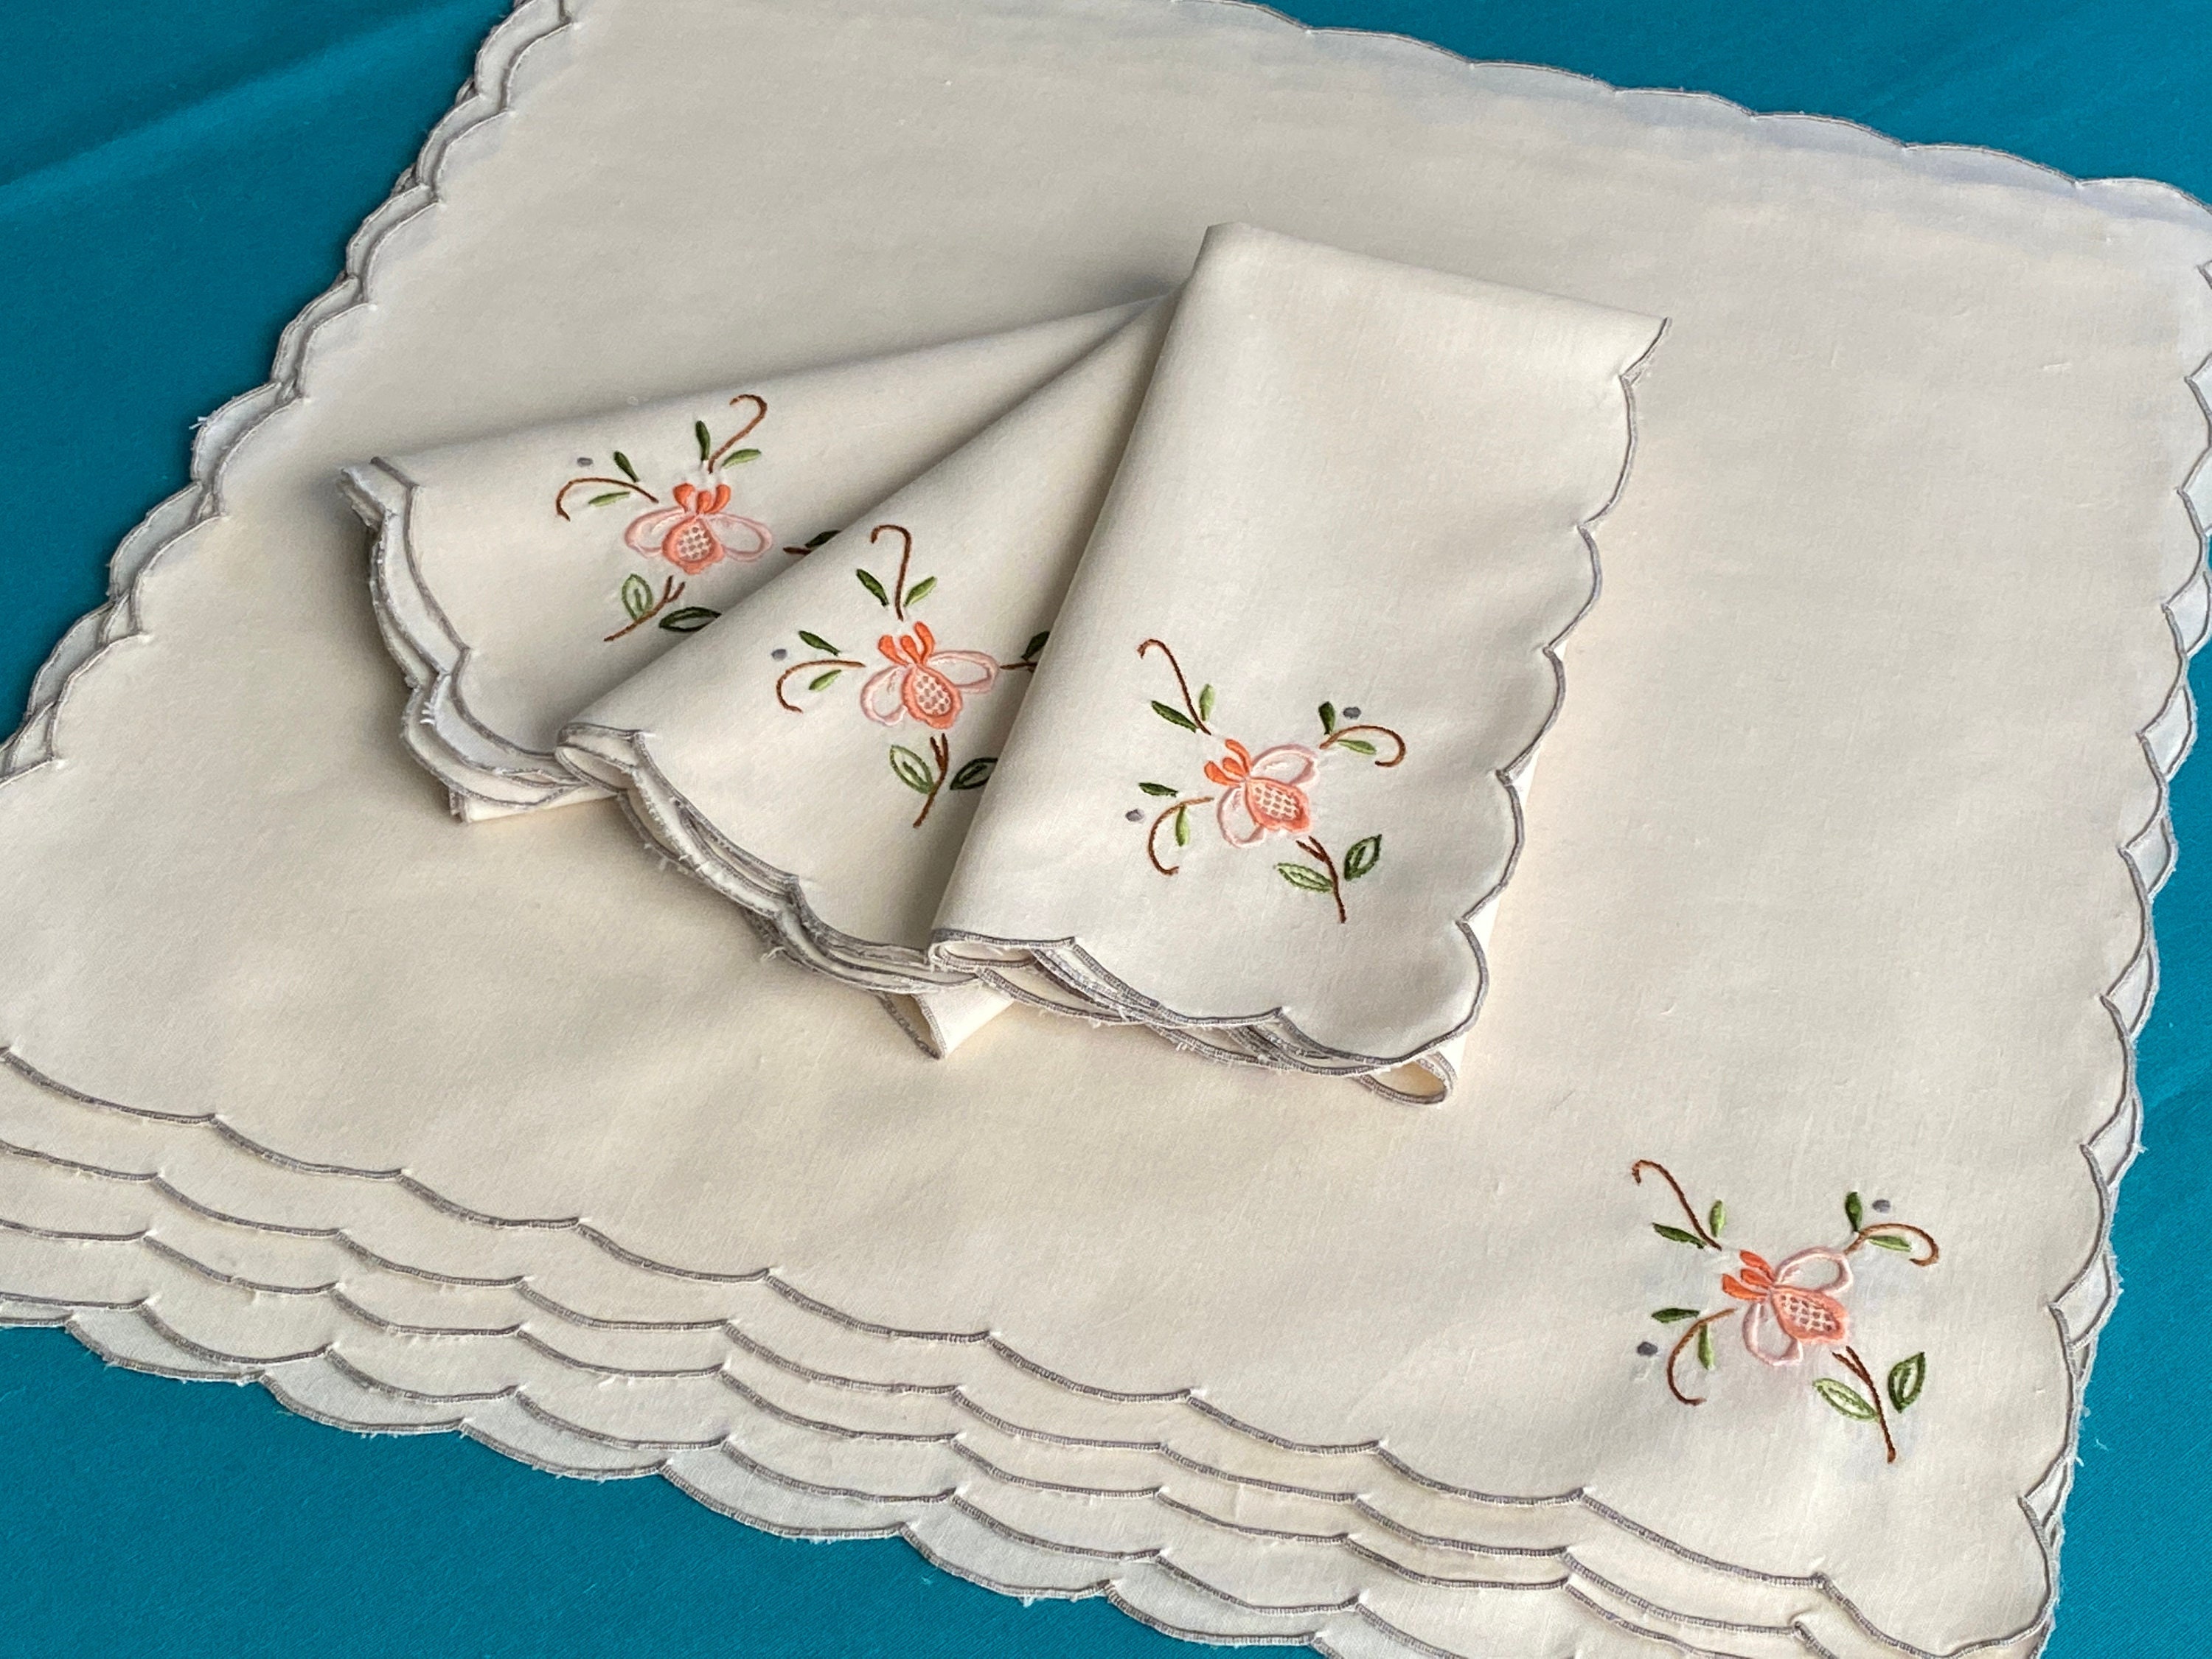 12 PCS  Embroidered Embroidery Dinner Cloth 16x16" Napkins Cream